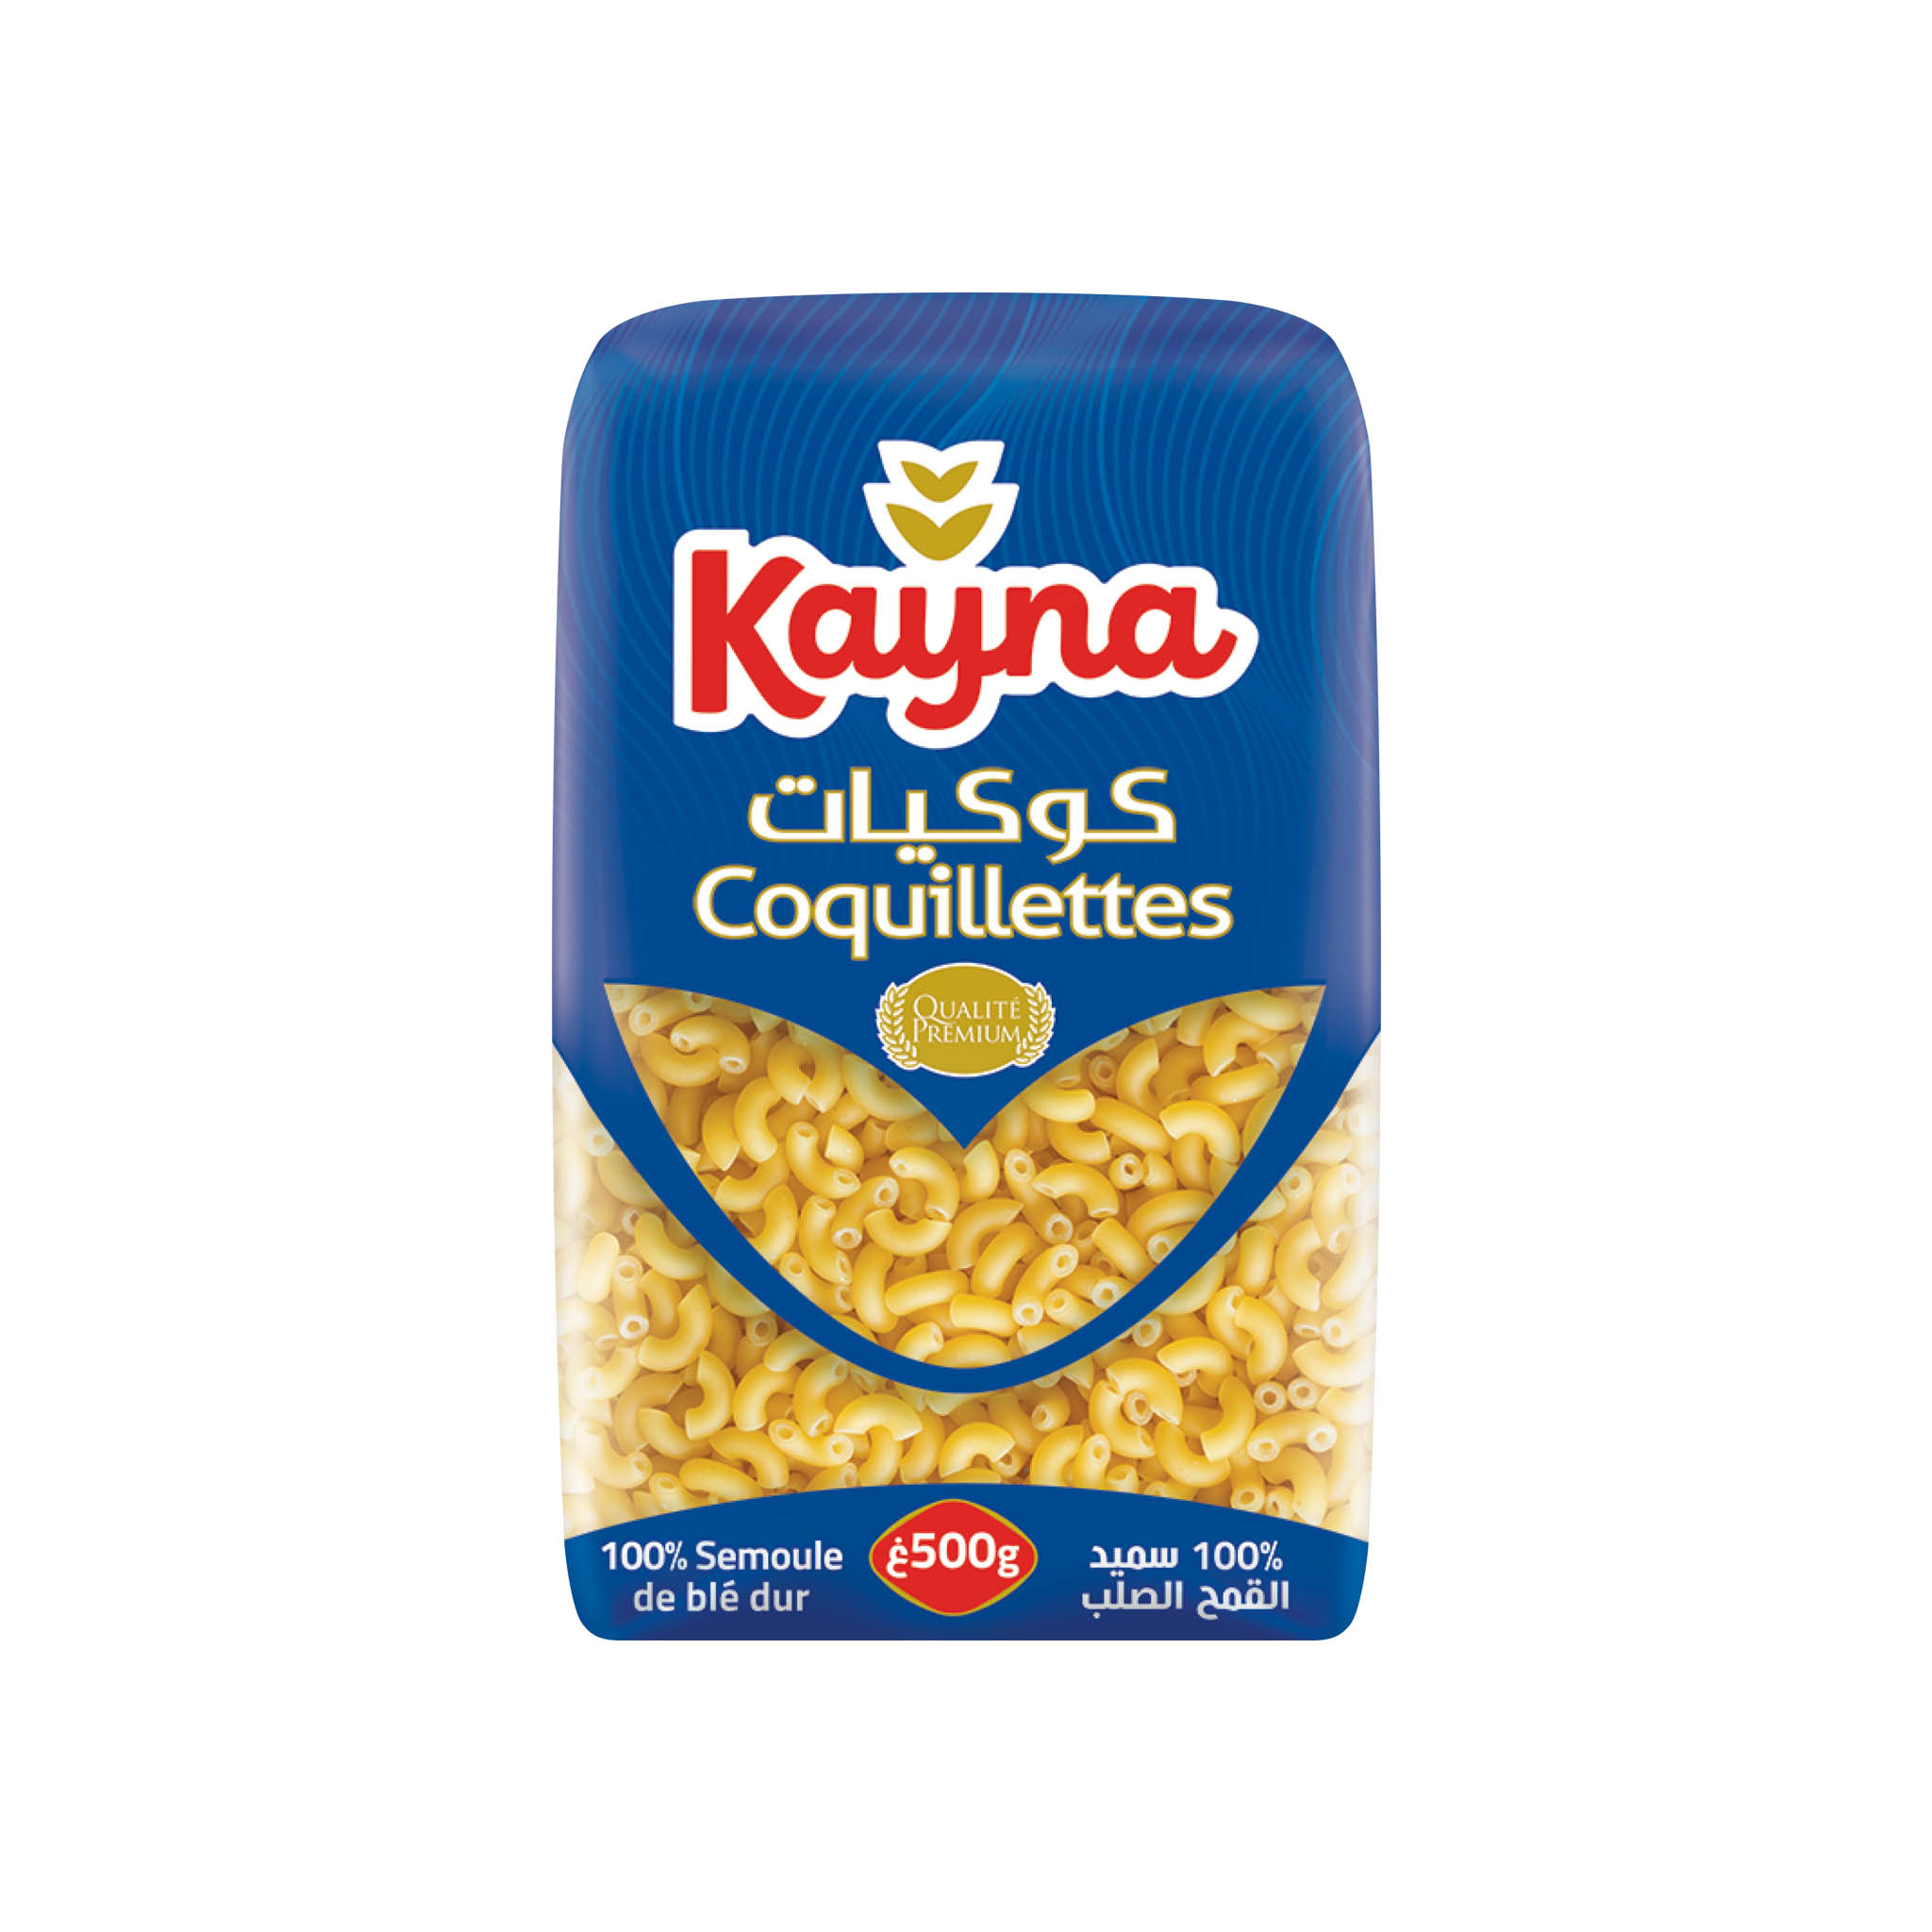 KAYNA Coquillettes 500g - PRODUCT